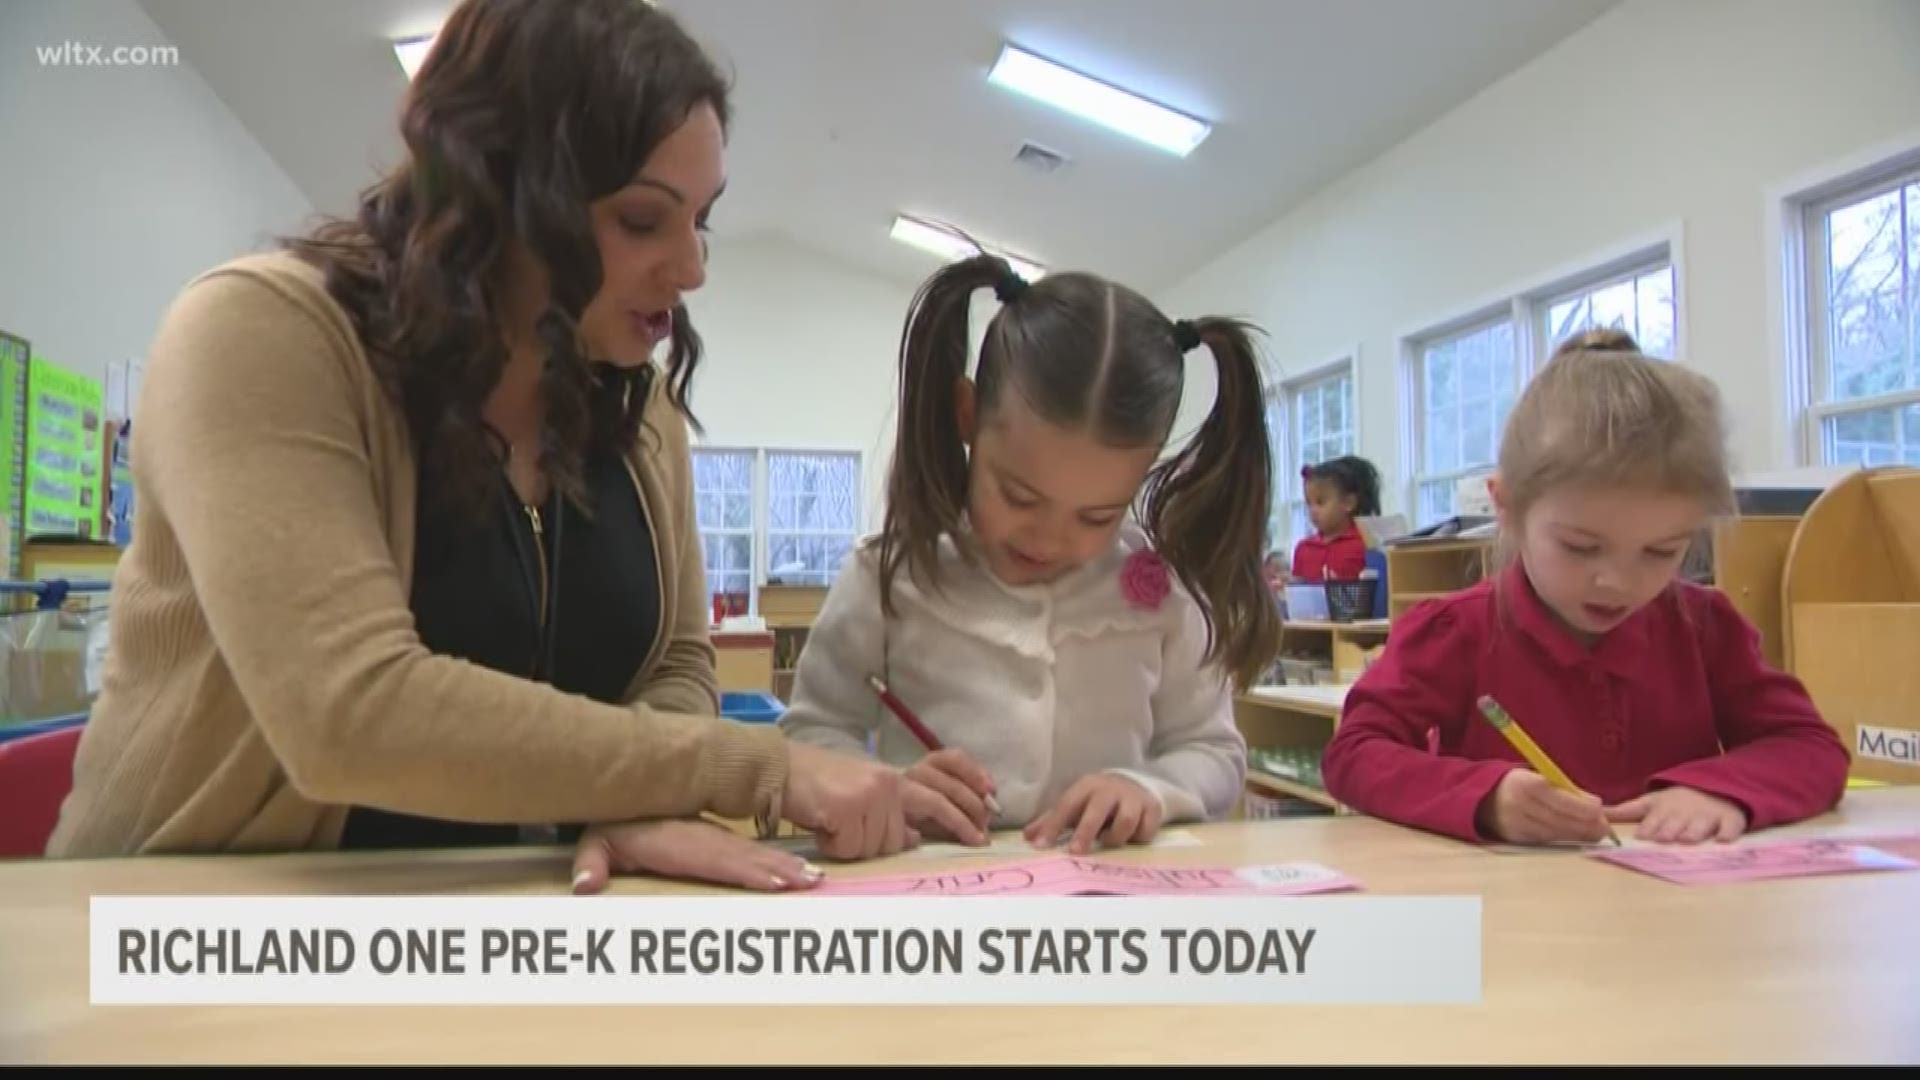 Families in Richland One can begin registering for the district's Pre-K programs on February 10, 2020.